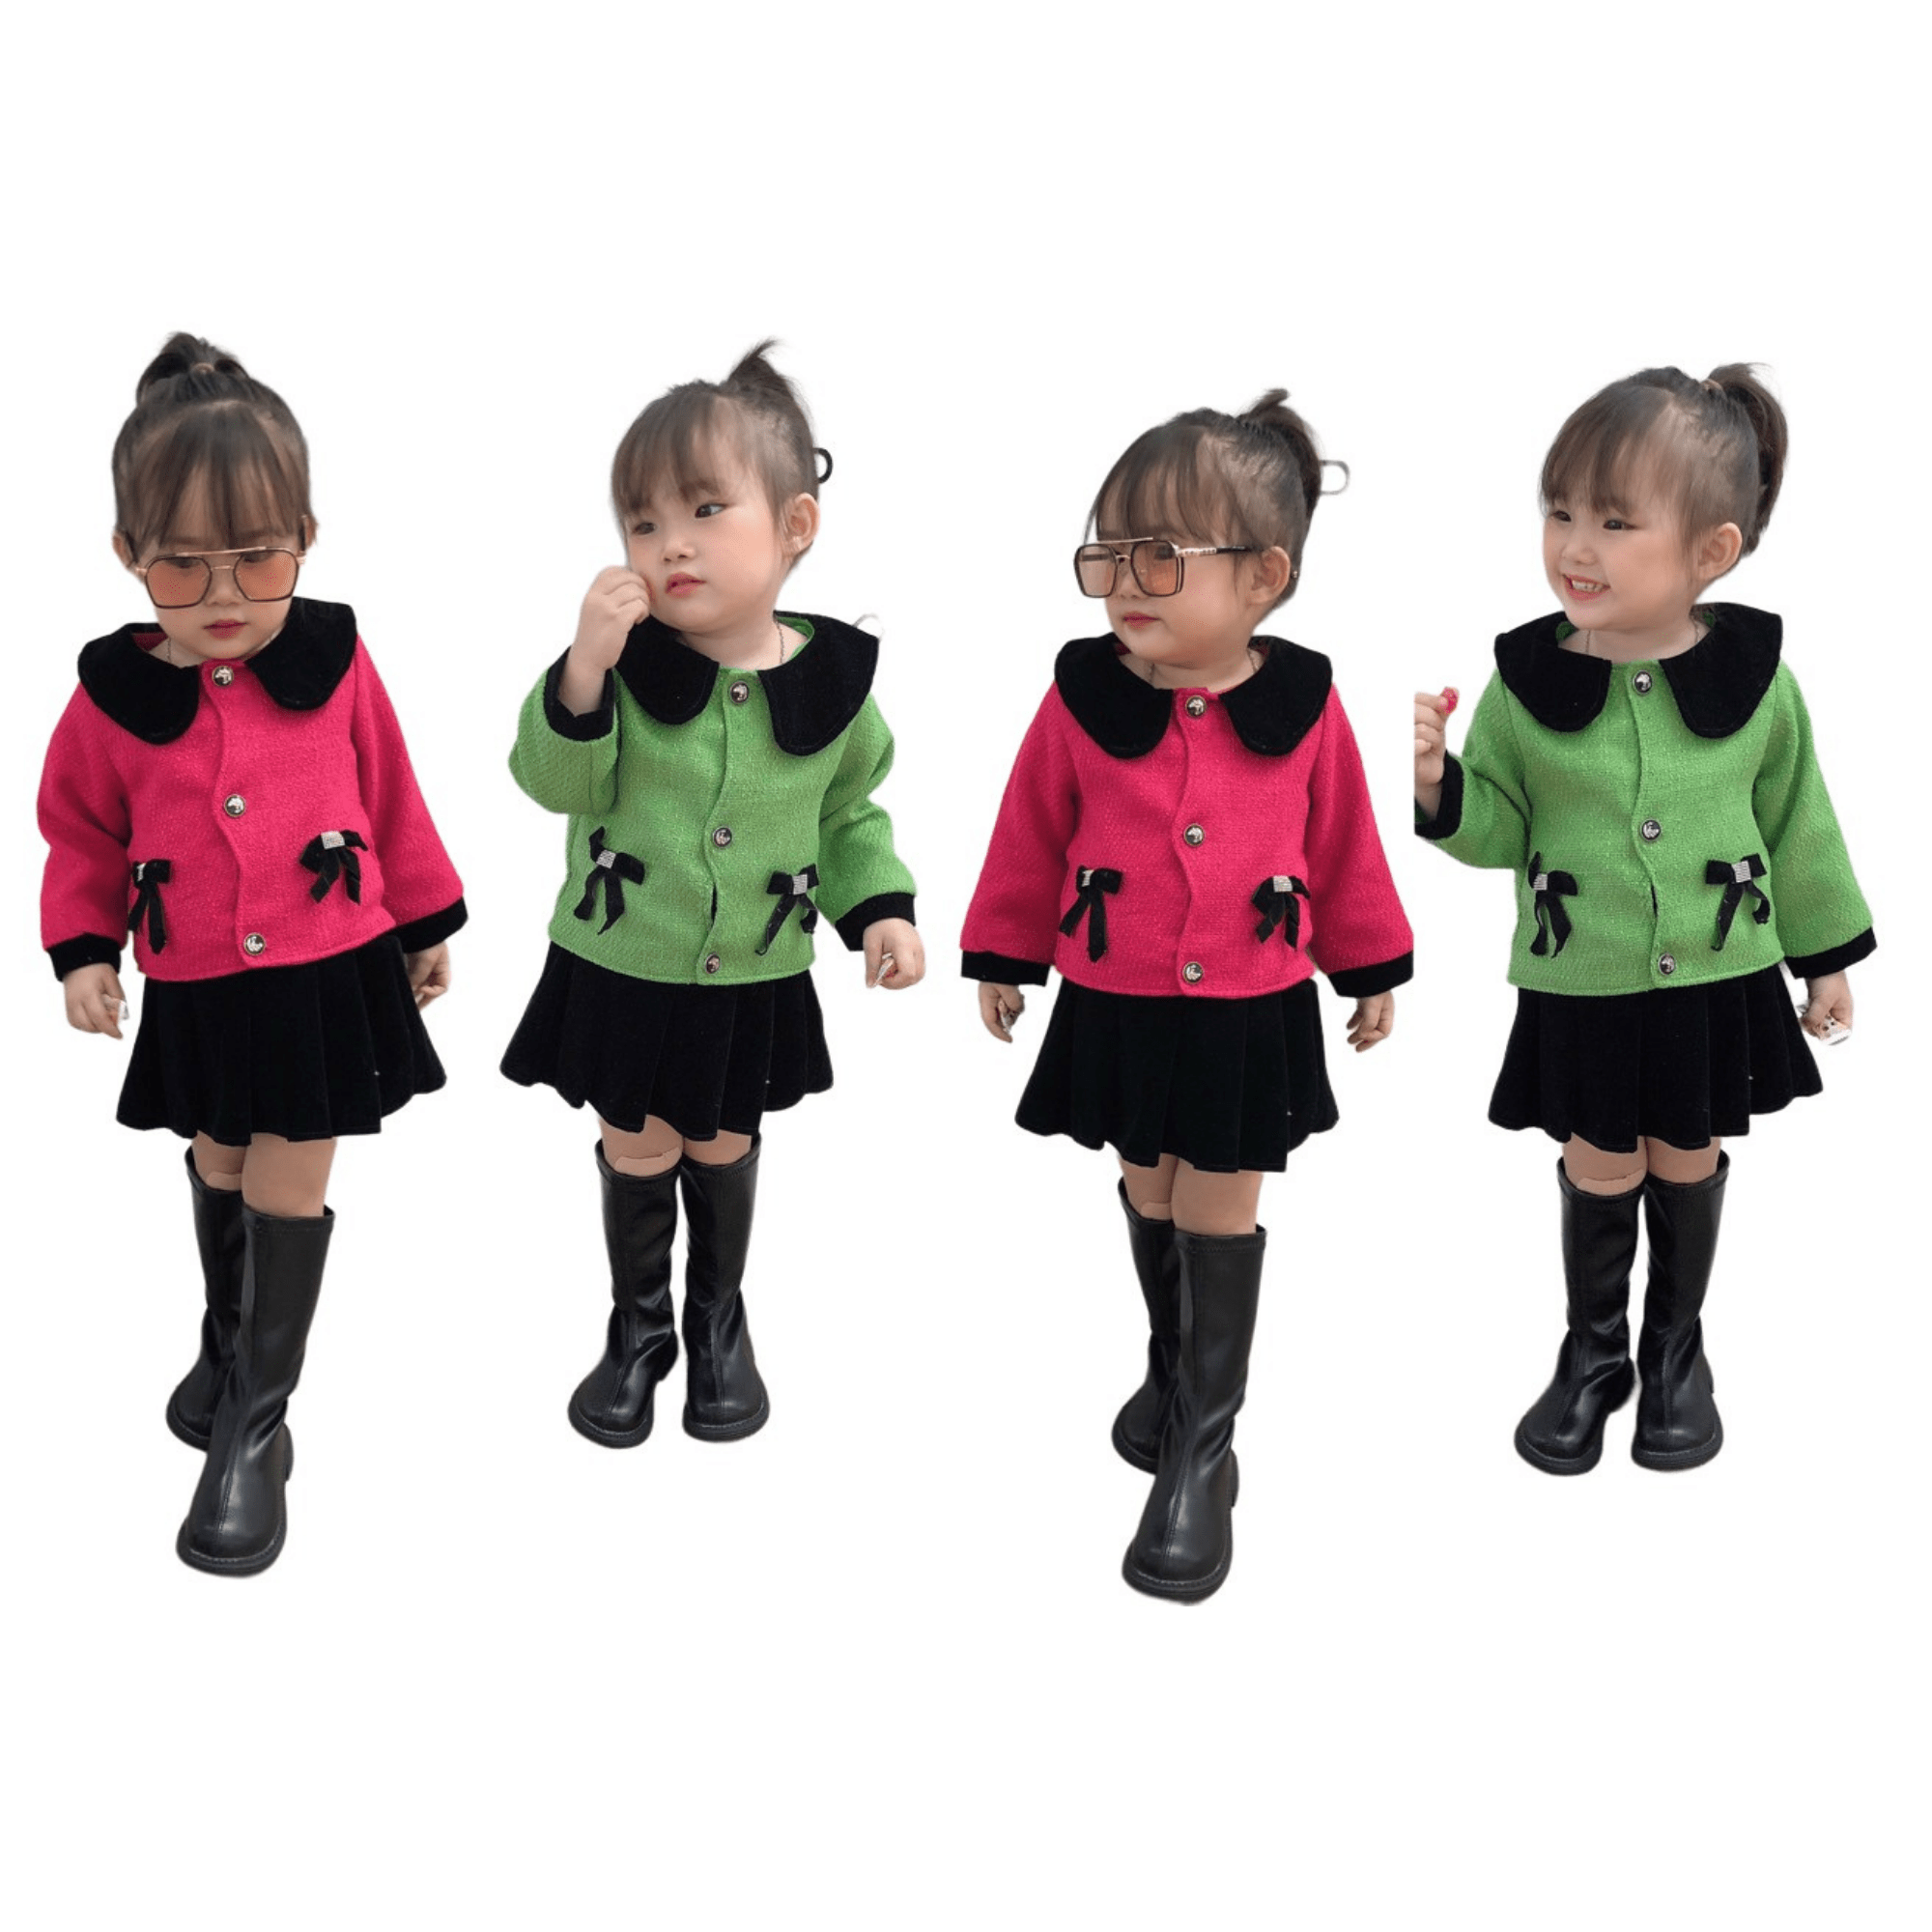 Kids Clothes Girls Customized Service 100% Wool Dresses New Arrival Each One In Opp Bag Made In Vietnam Manufacturer